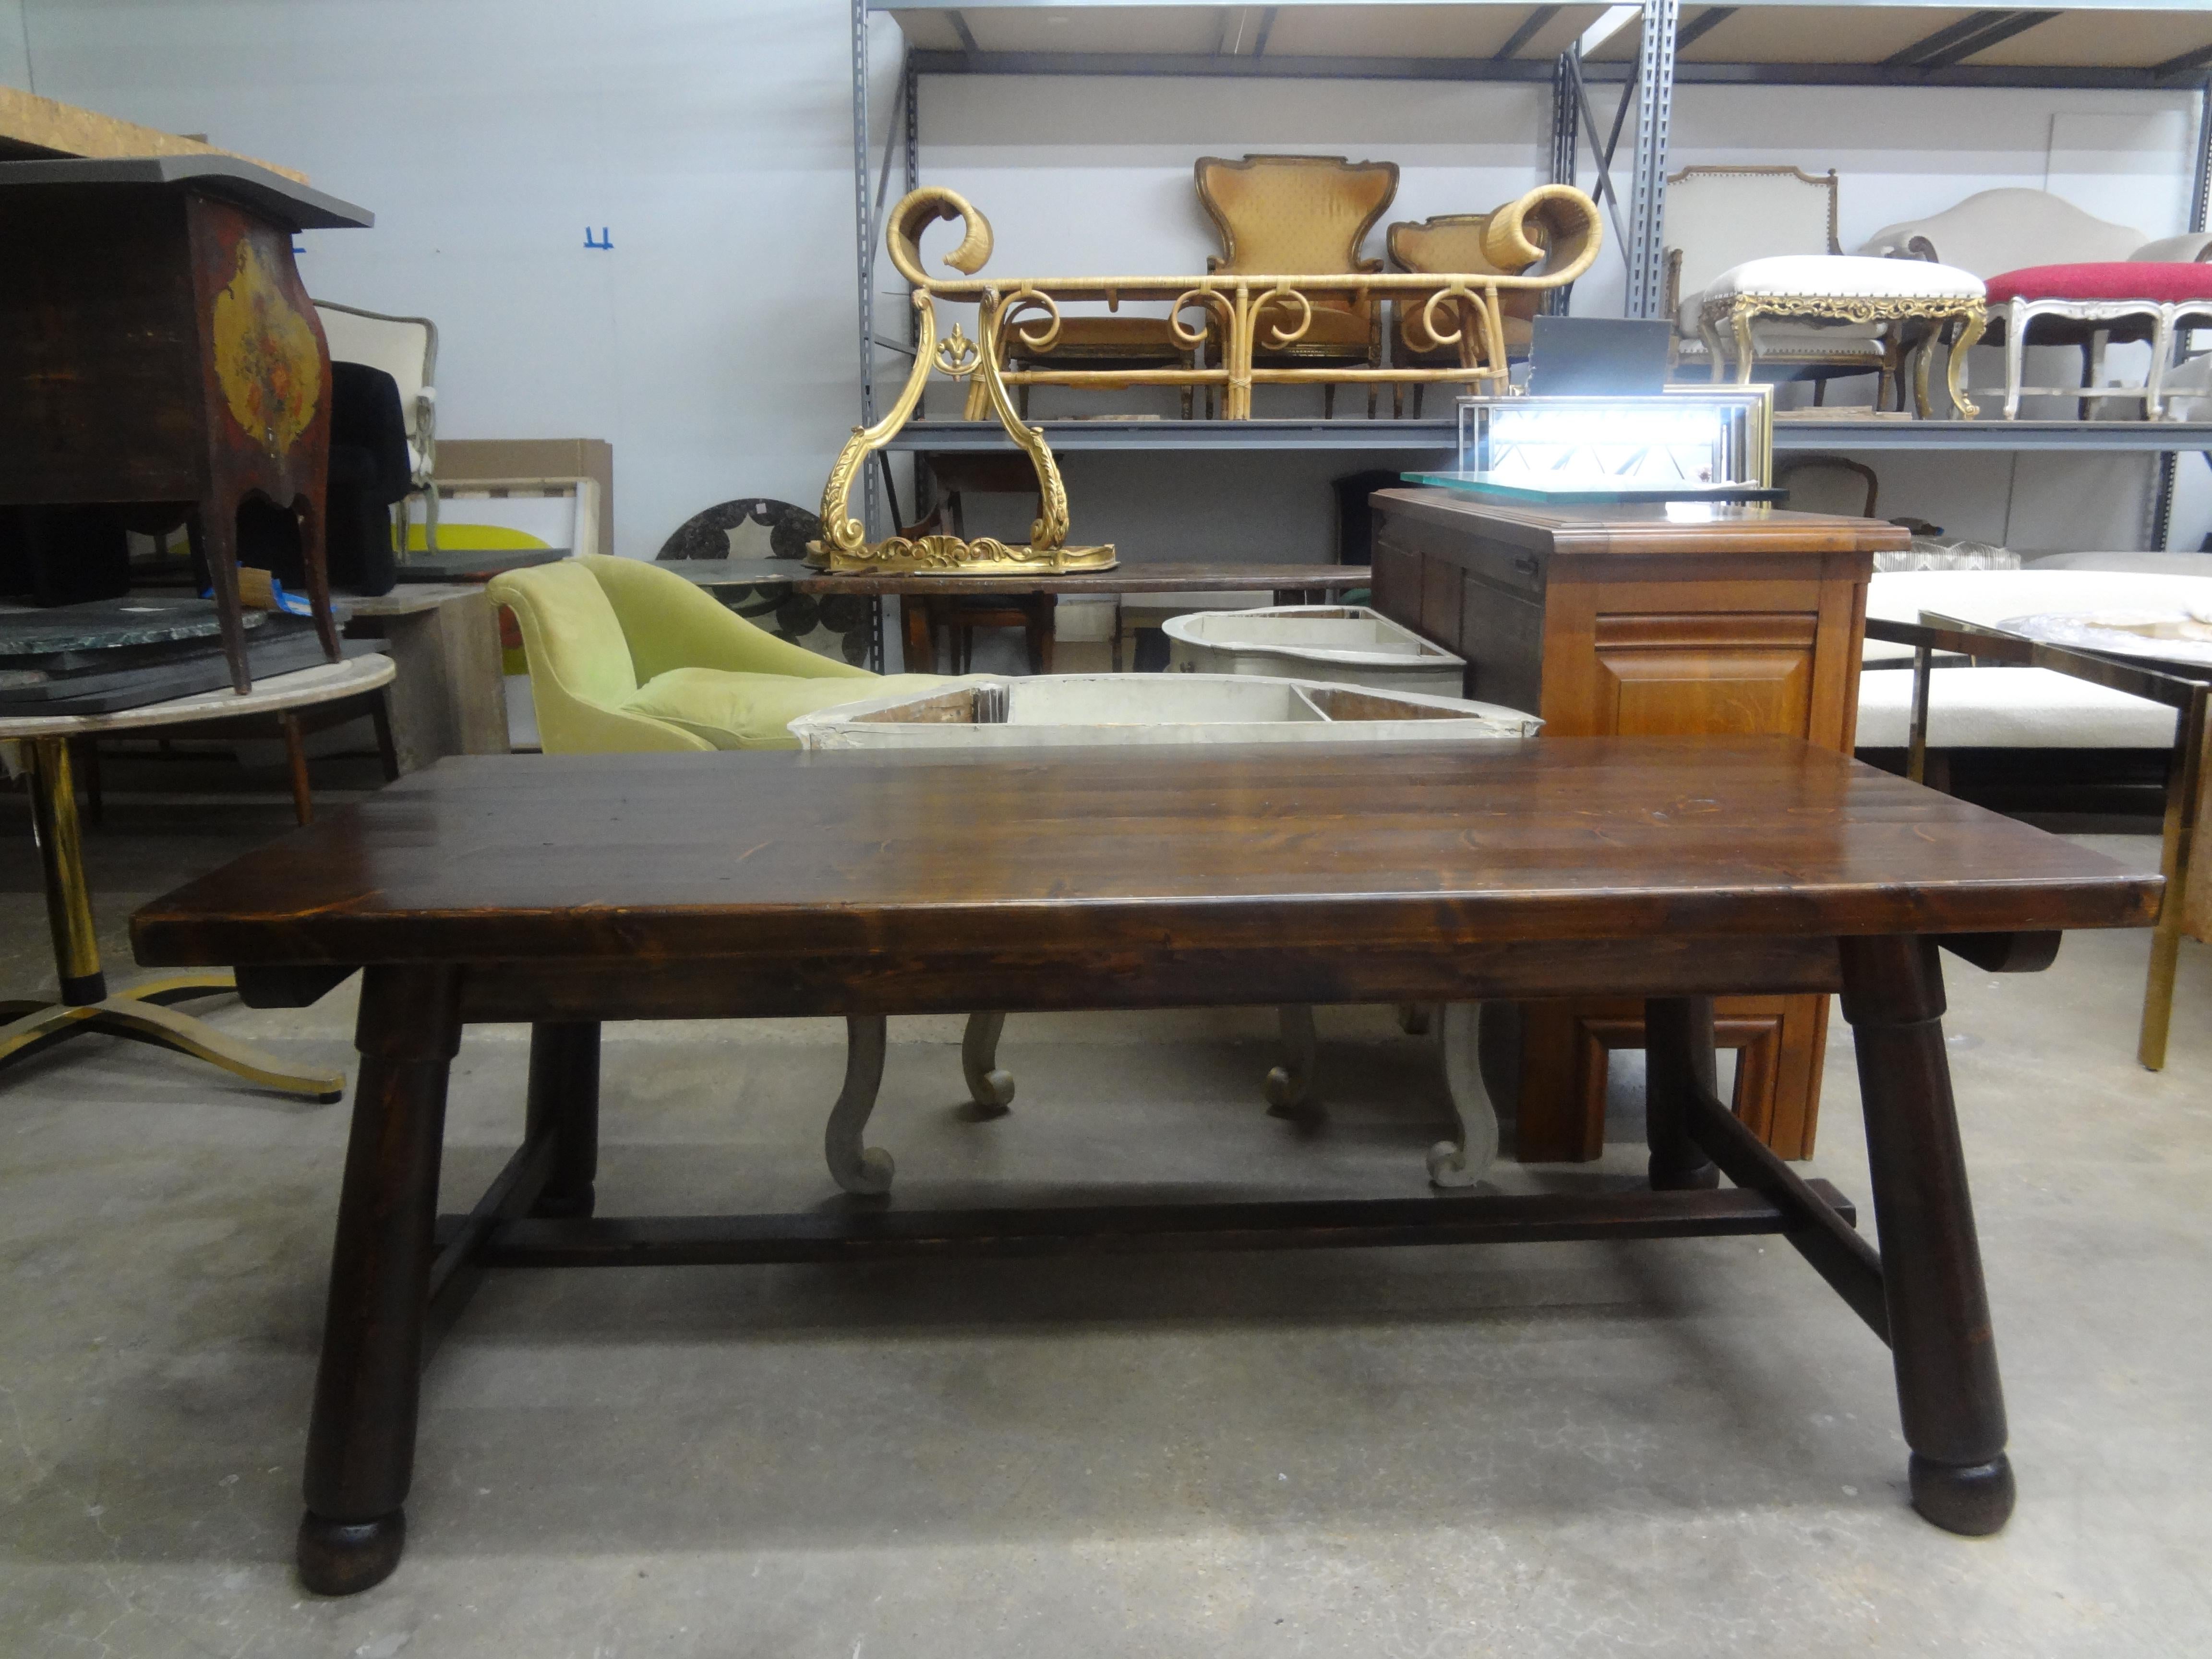 French Brutalist Dining Table By Georges Robert.
Our handsome French Brutalist table, dining table, library table or trestle table is constructed of solid pine and features a stretcher, conical legs terminating in ball feet and a rich patina.